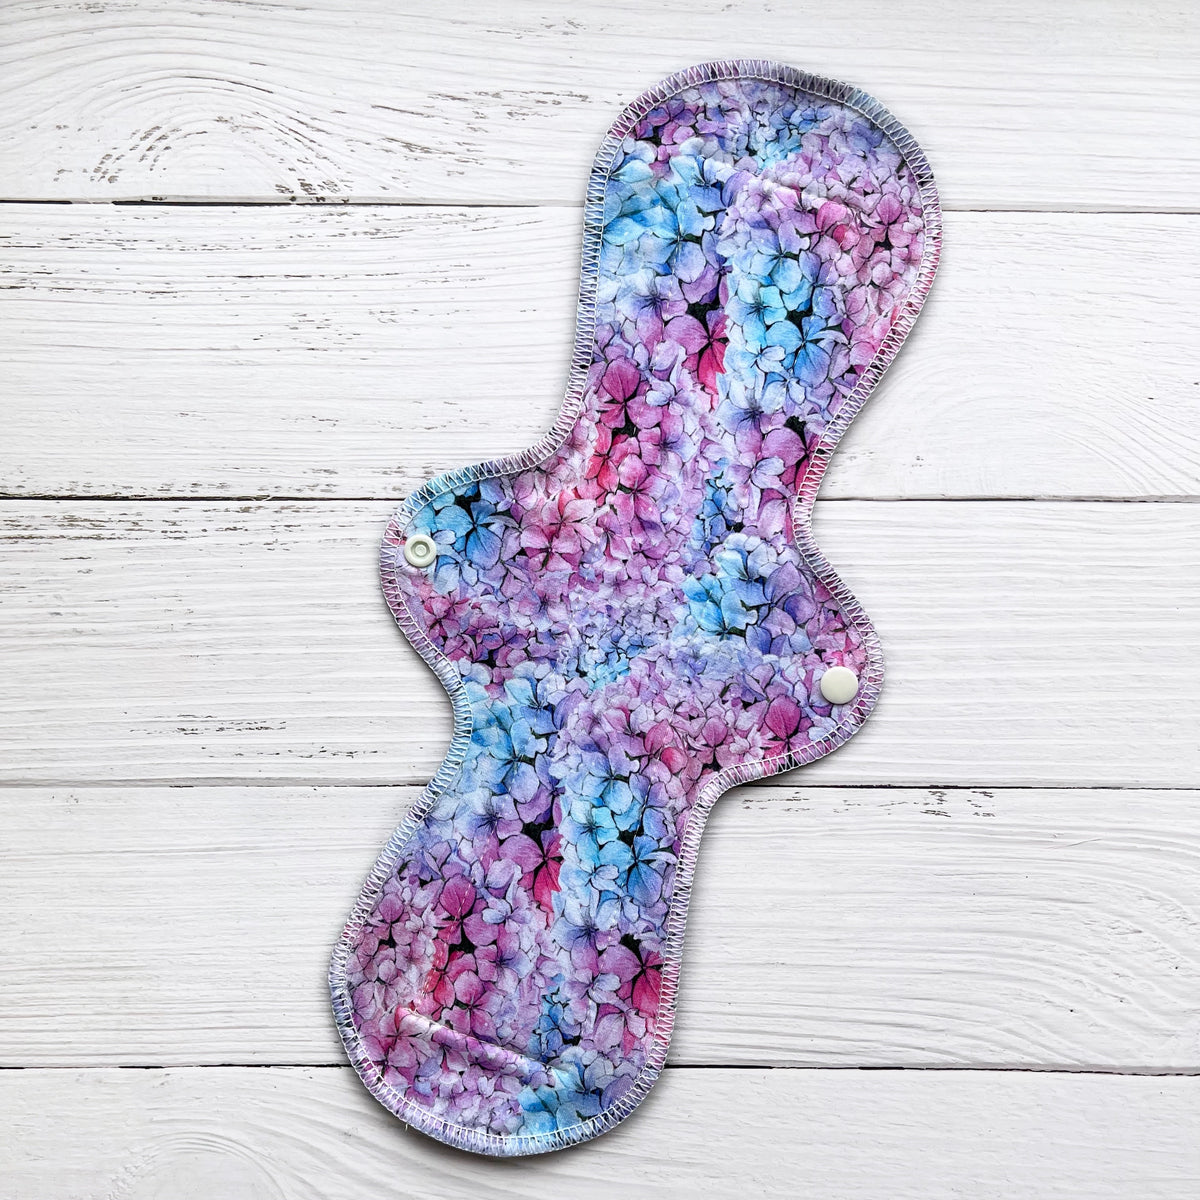 14 inch long reusable pad with a blue pink and purple hydrangea print on a rustic wood background